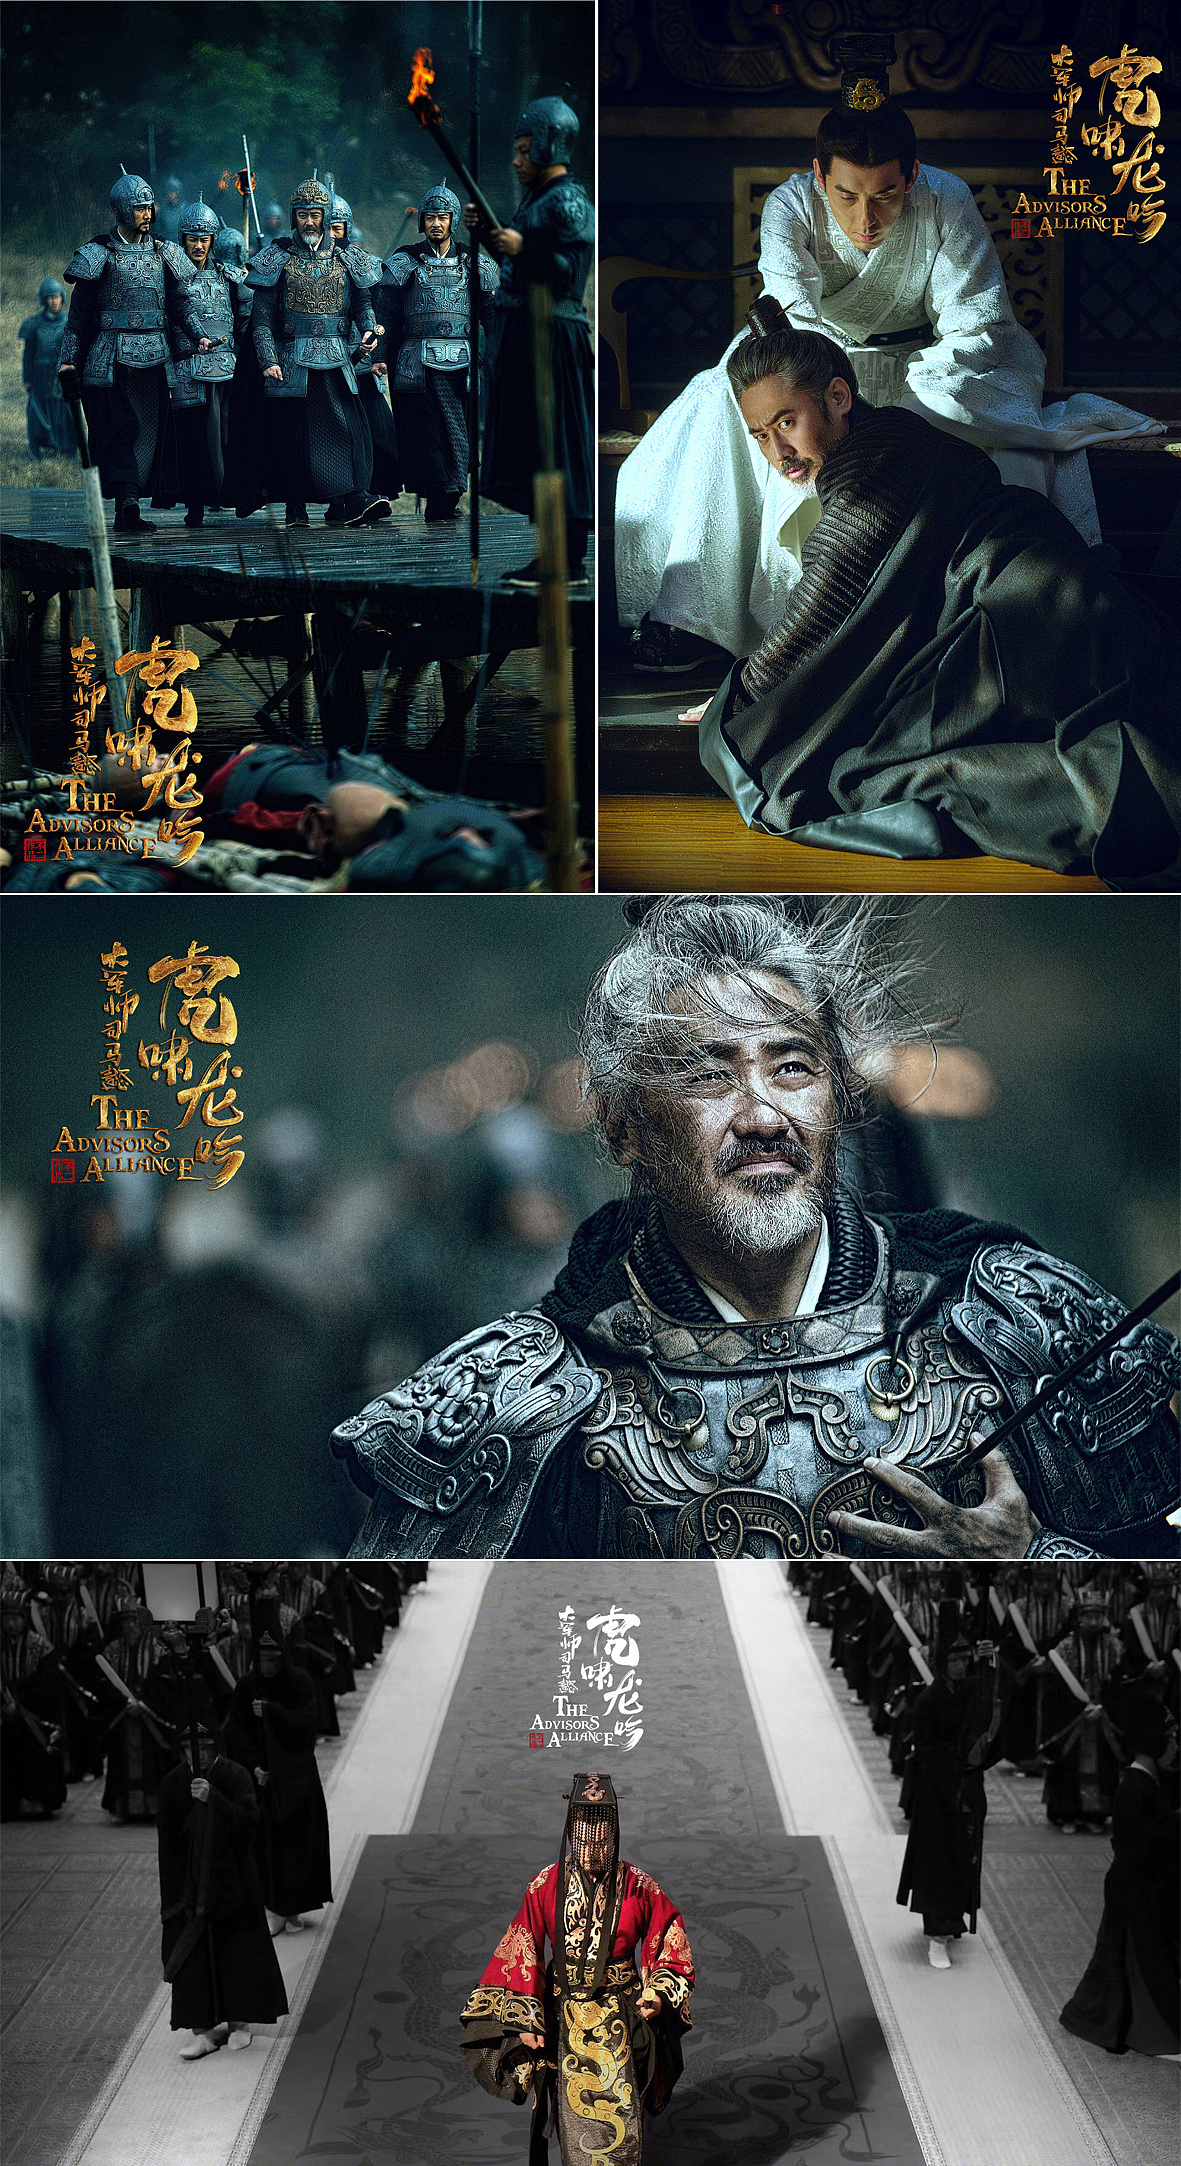 12P Super cool Chinese fonts and movies combined design